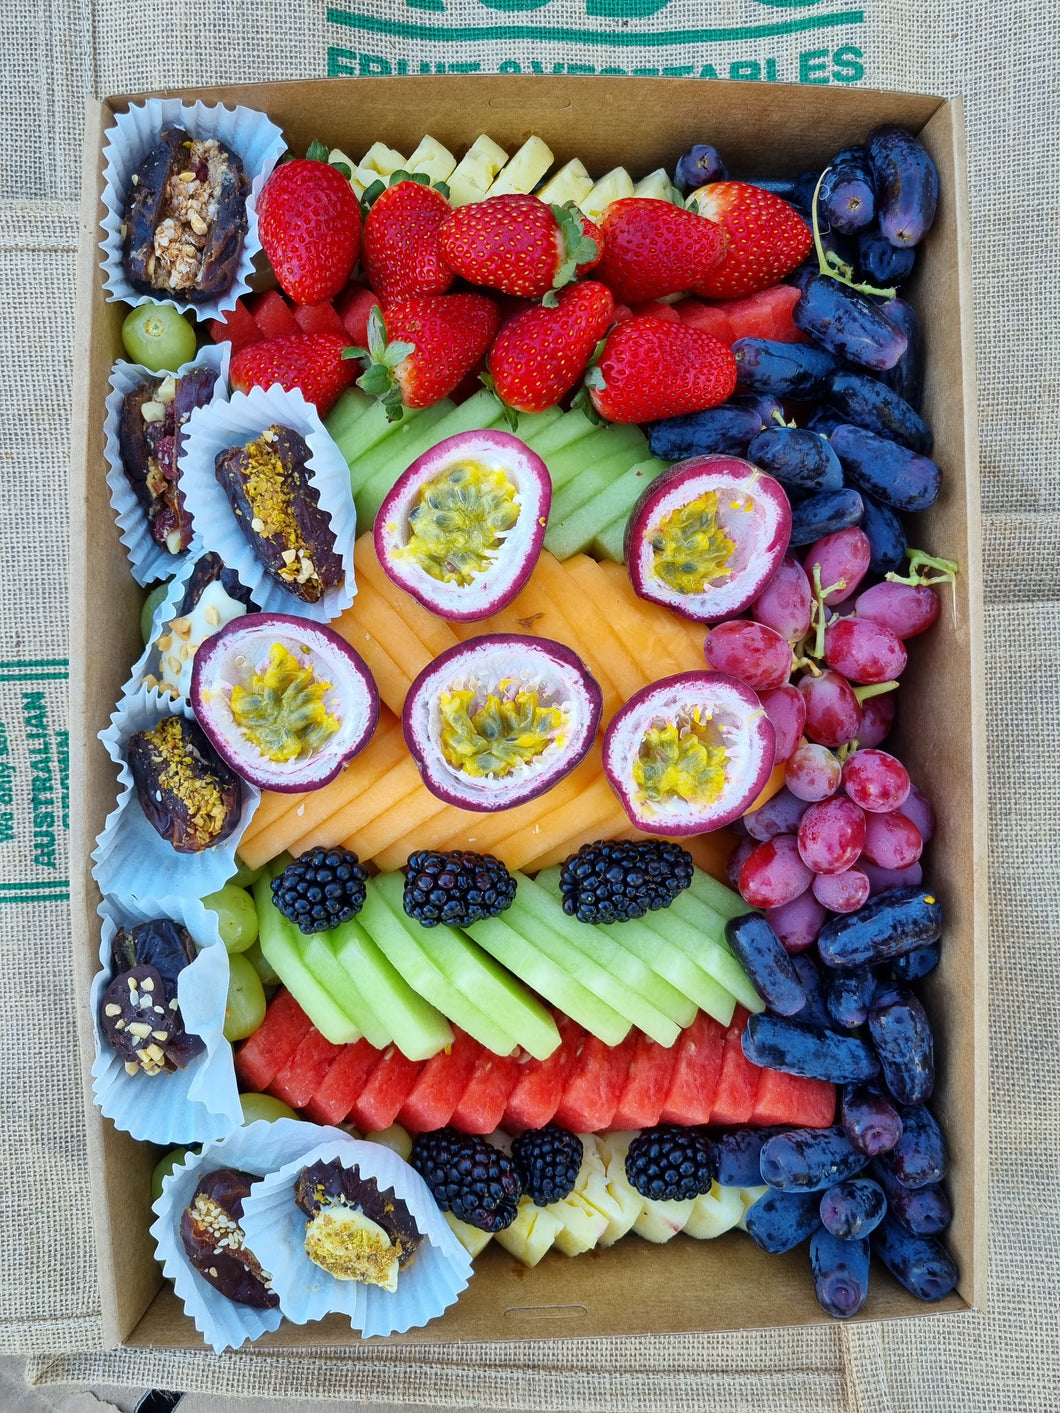 Grazing - Fruit Platter Box with Chocolate Dates